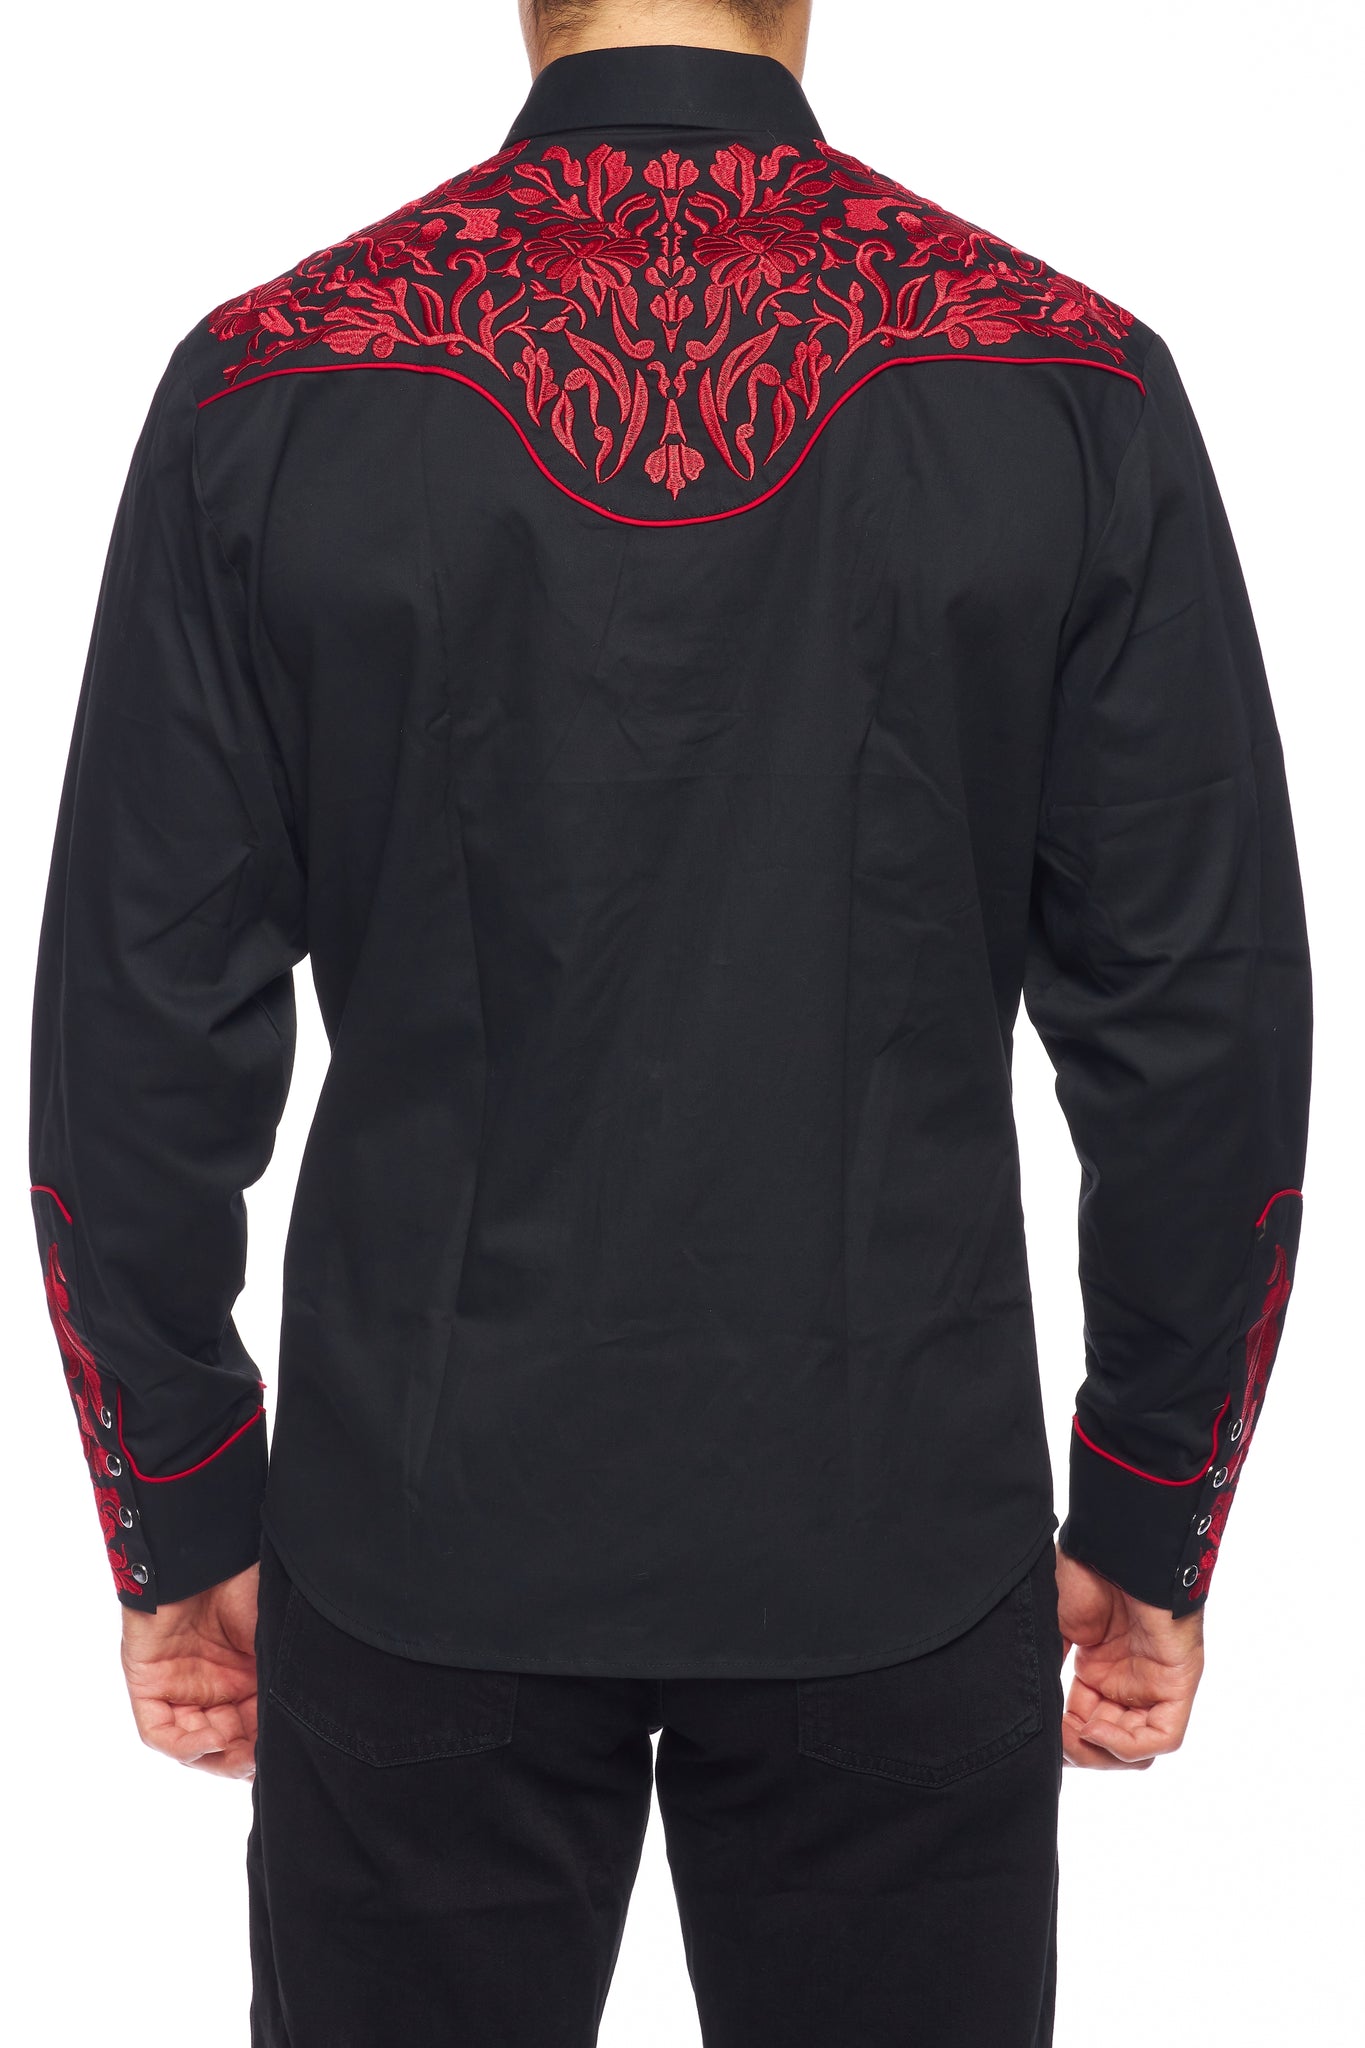 Men's Western Cowboy Embroidery Shirt -PS500L-564